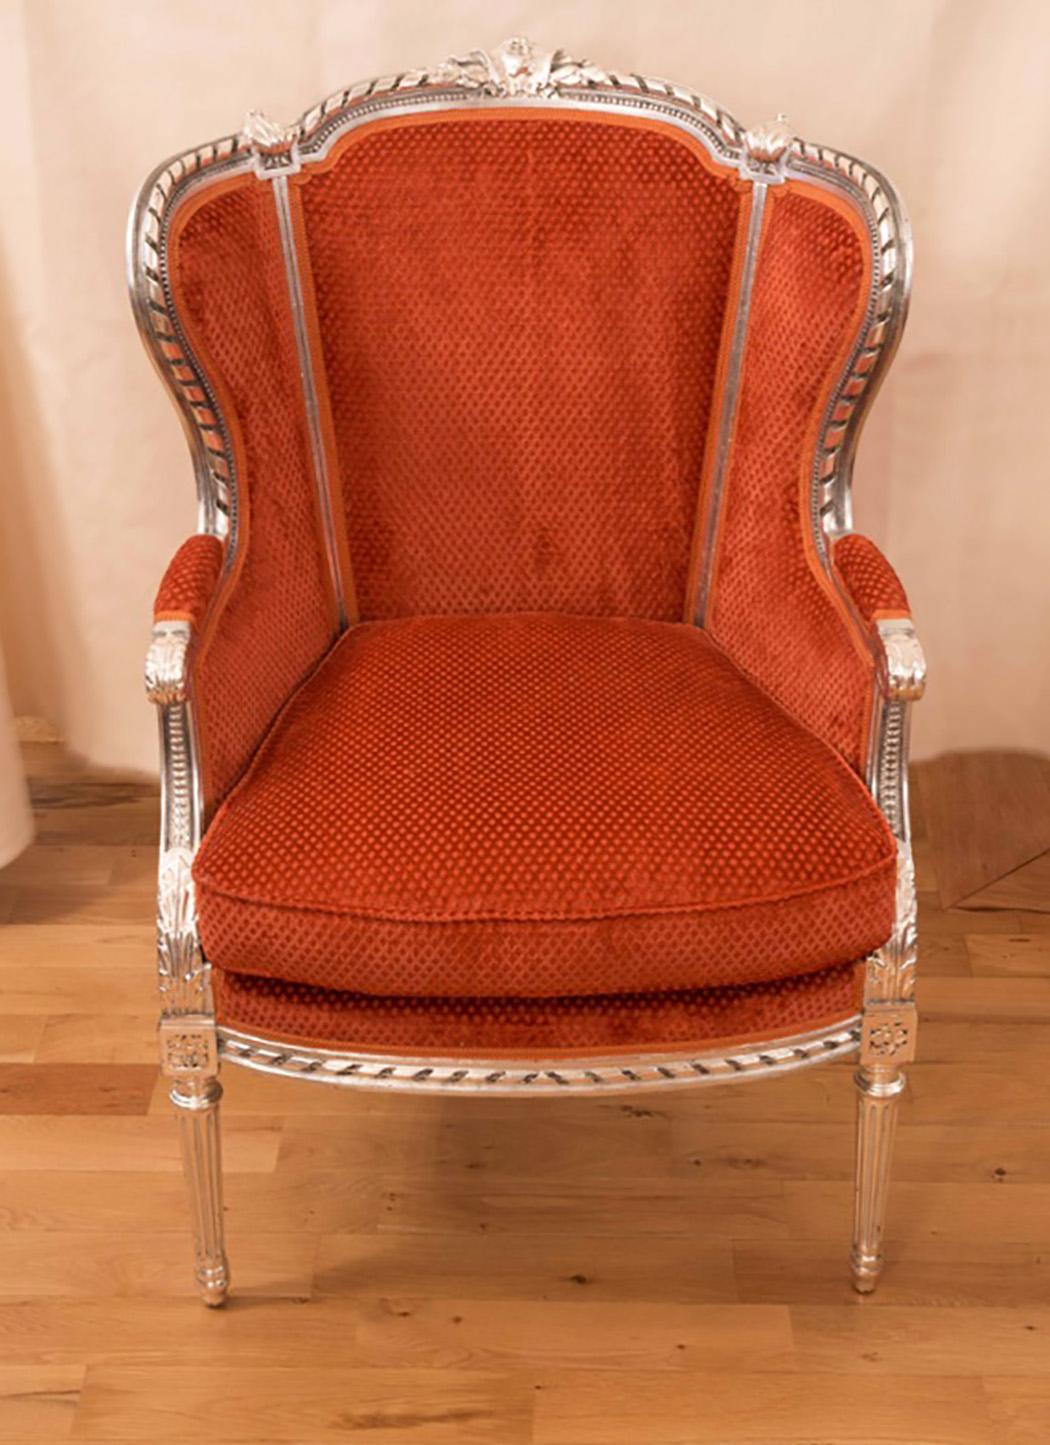 This pair of armchairs came to us from a friend, descendant of a traditional familiy in Geneva, Switzerland. Her grandfather was a renowned doctor in the city. Geneva was a very honorable christian-calvinistic place that time. When the first brothel